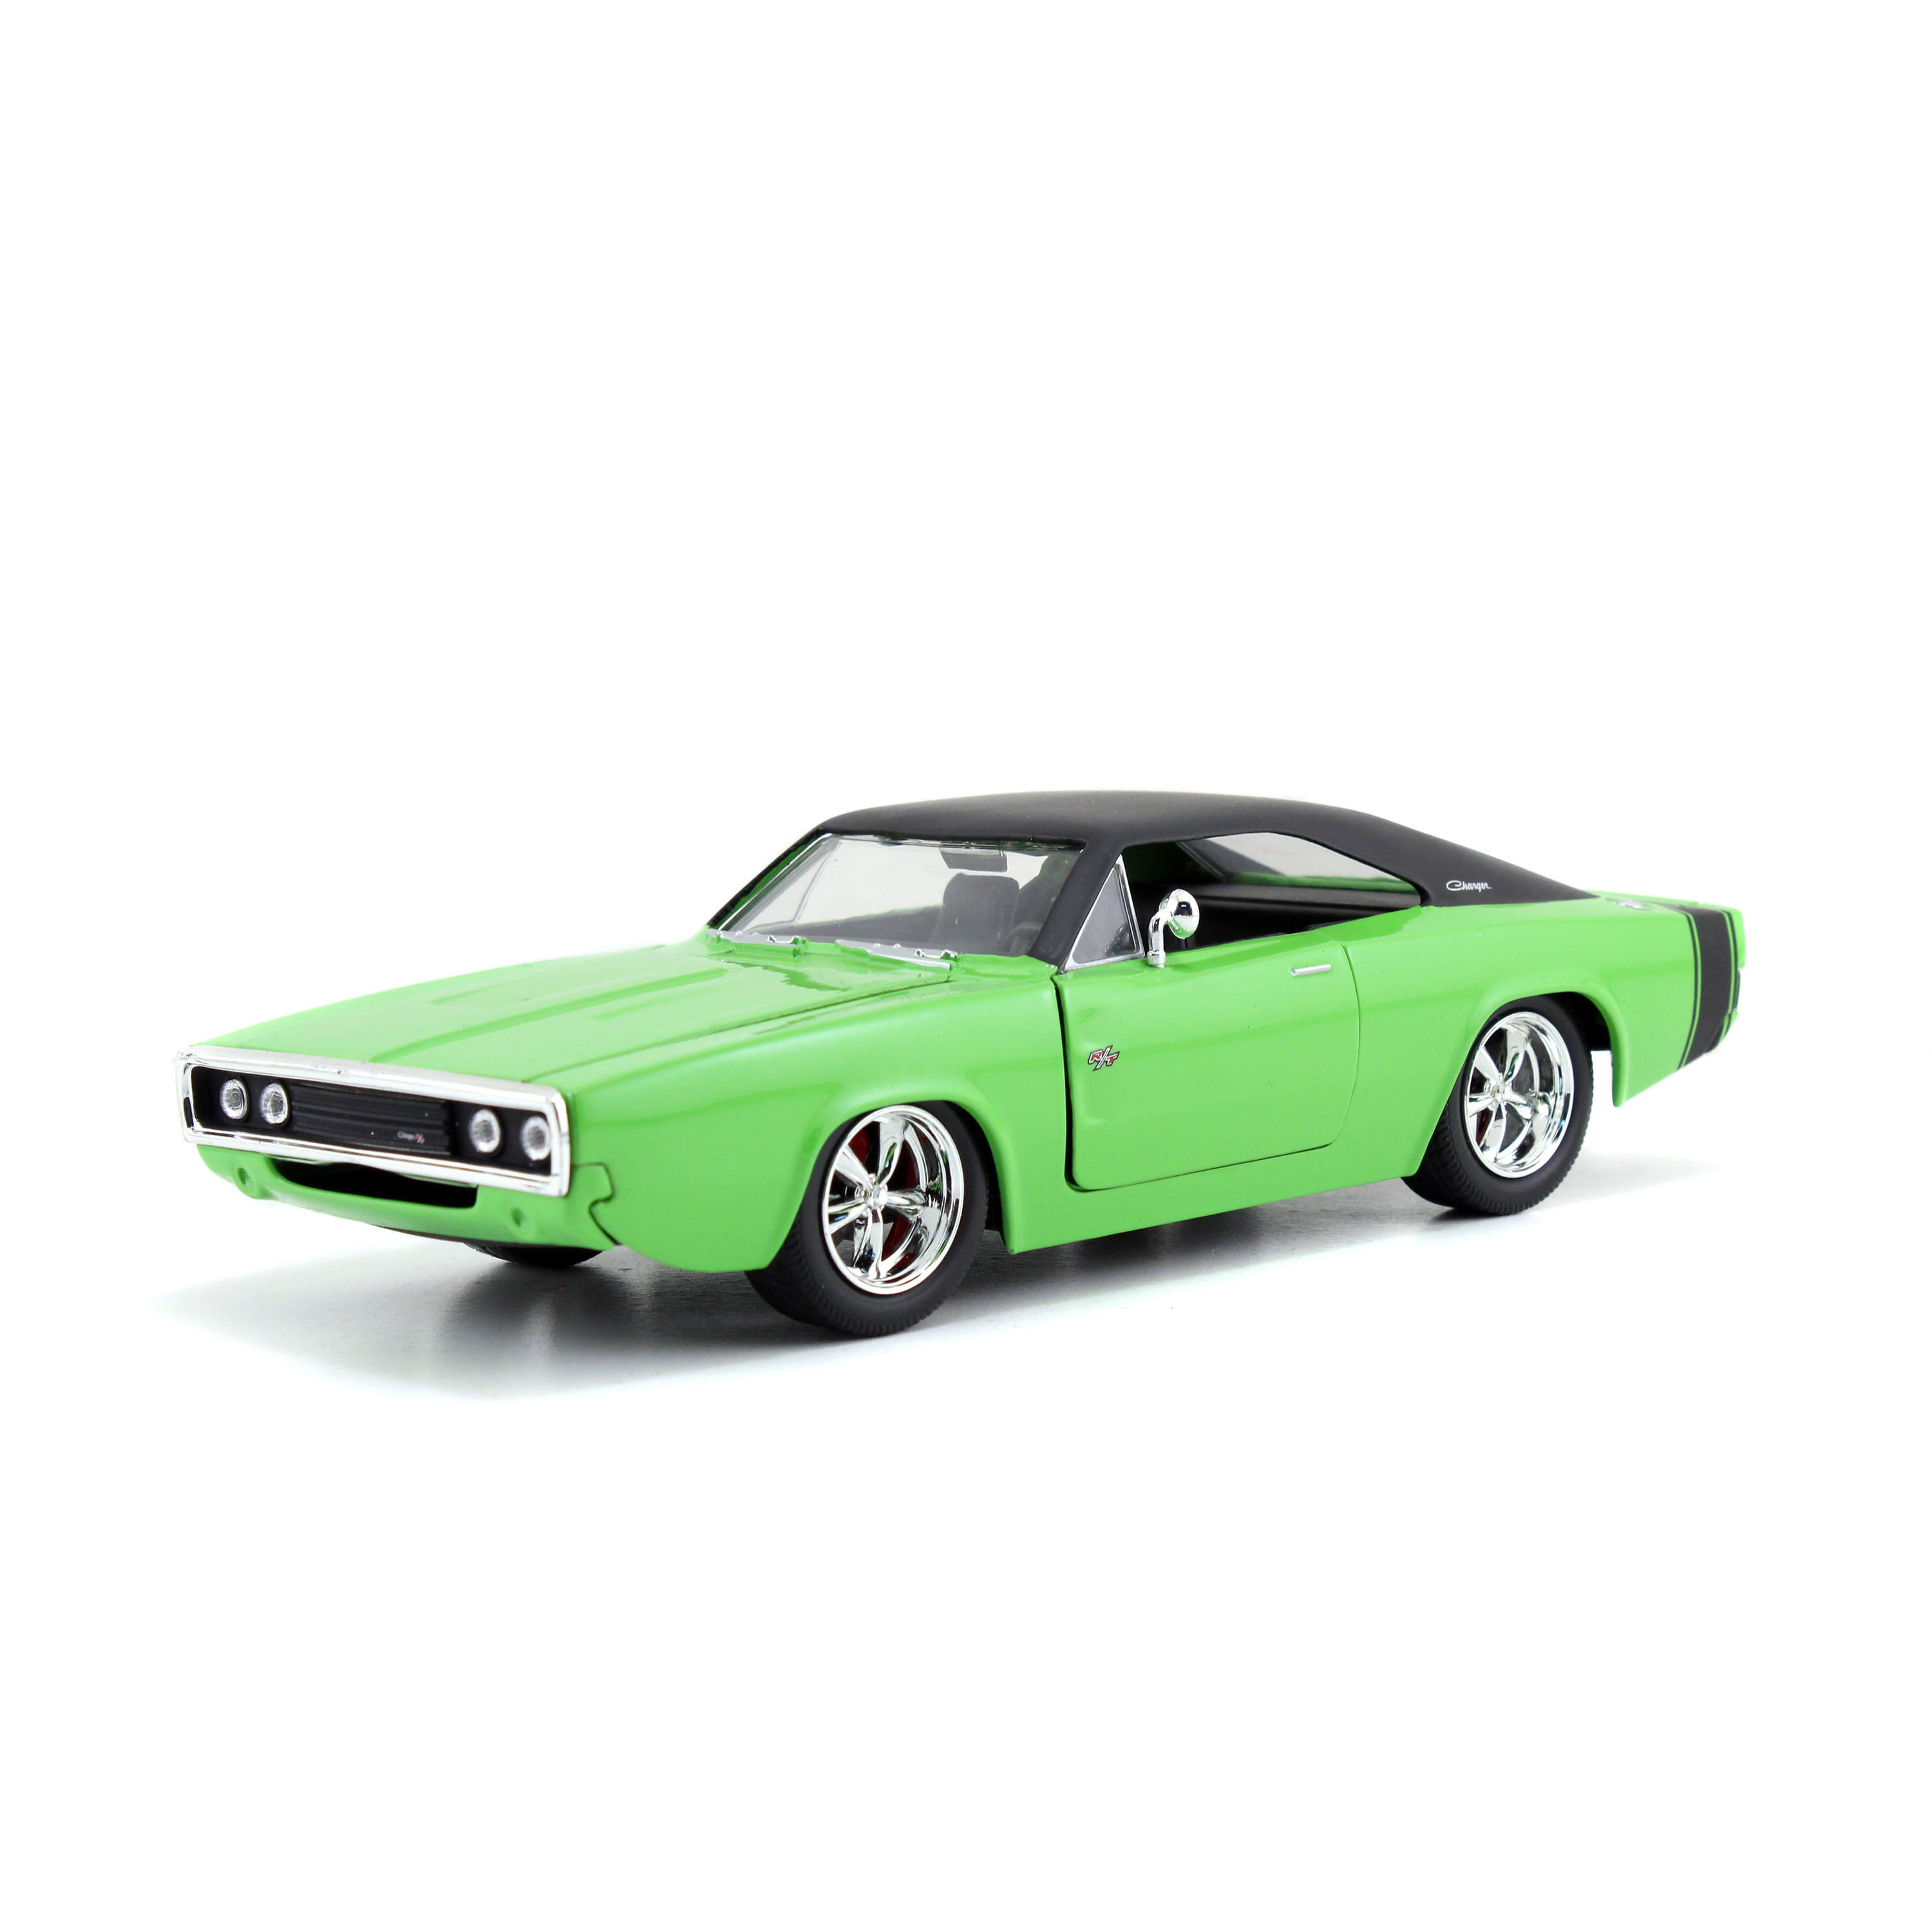 Big Time Muscle 1970 Dodge Charger R/T Die-cast Car Green Play Vehicles